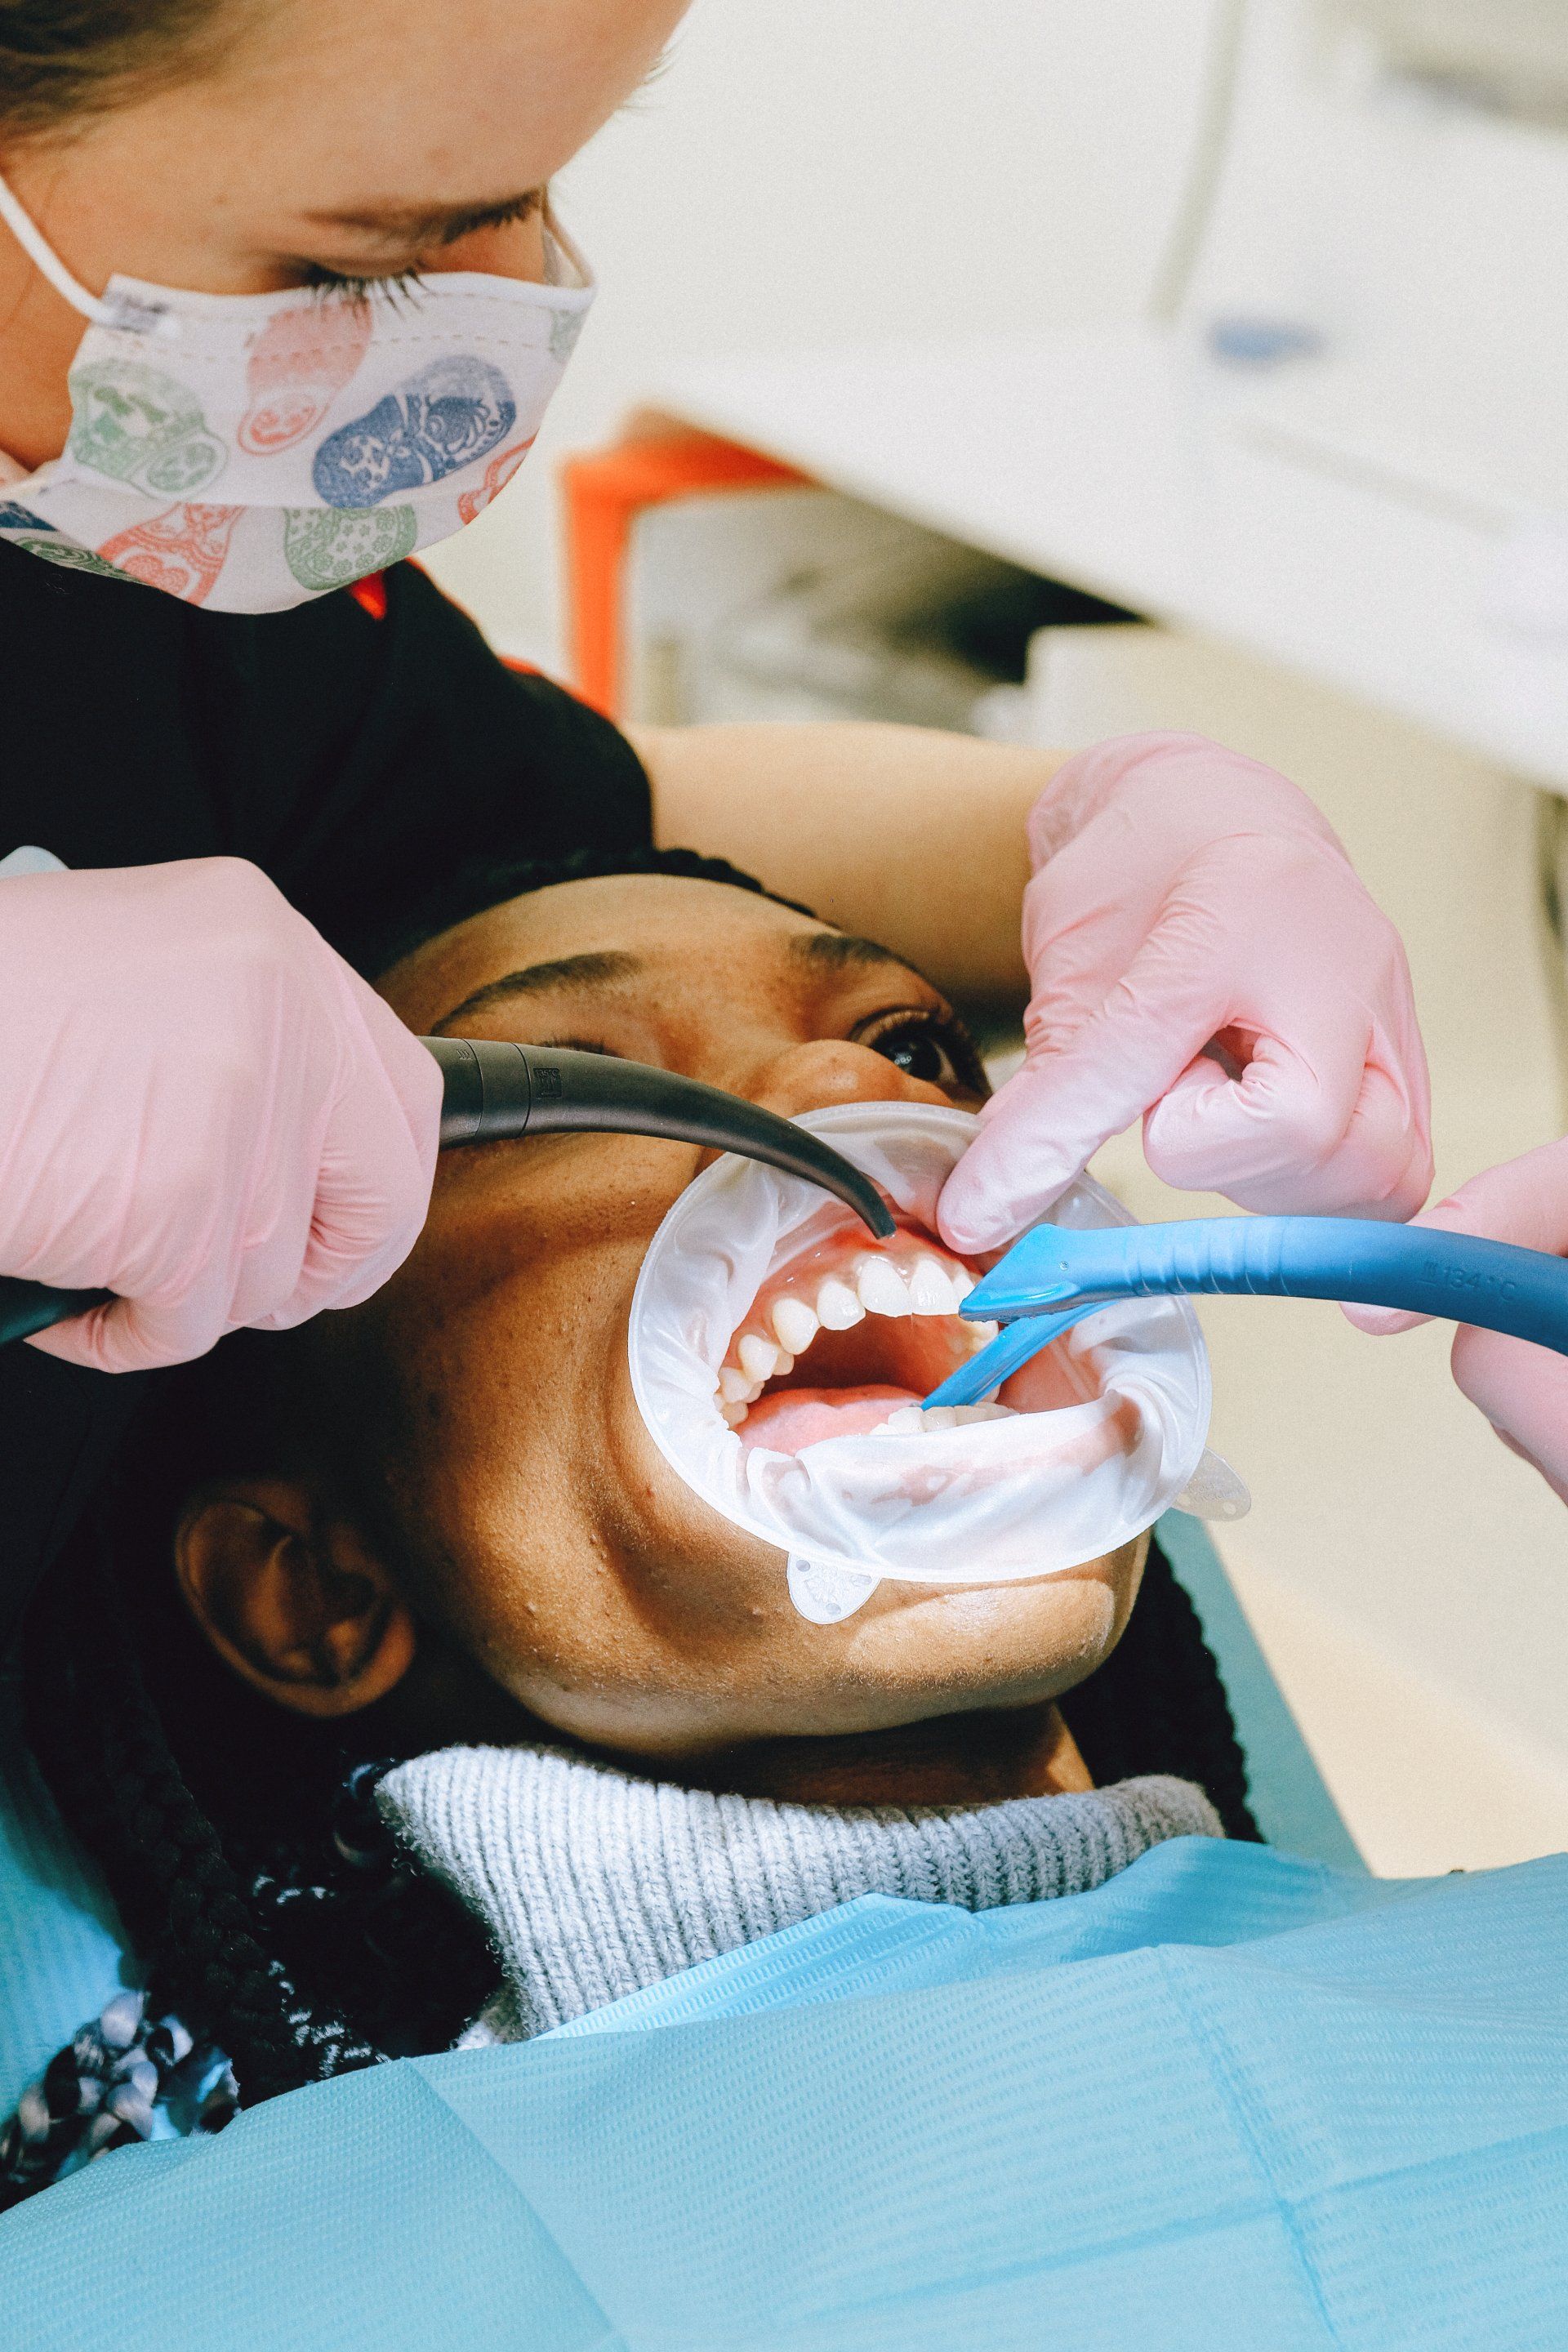 How Laser Dentistry Technology is Benefiting Oral Health